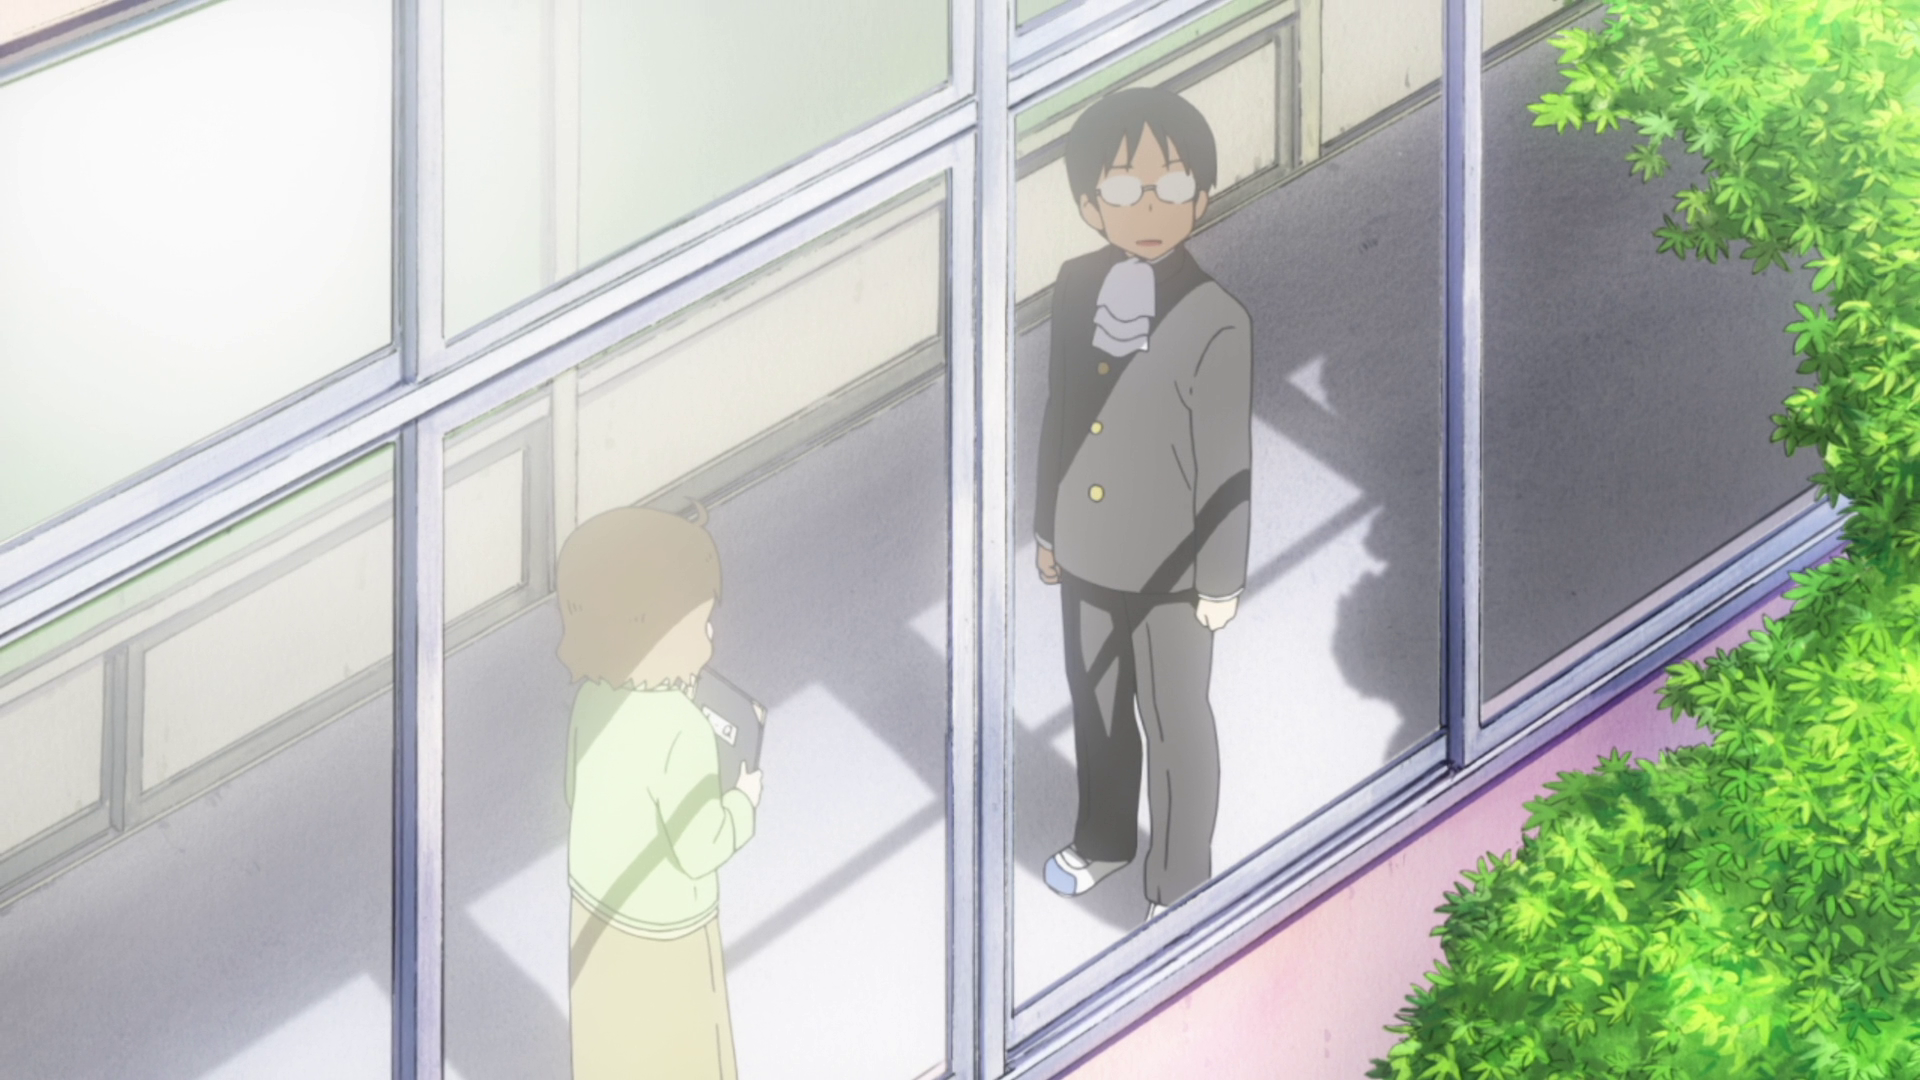 nichijou and the absurdity of everyday life daladybugproductions nichijou and the absurdity of everyday